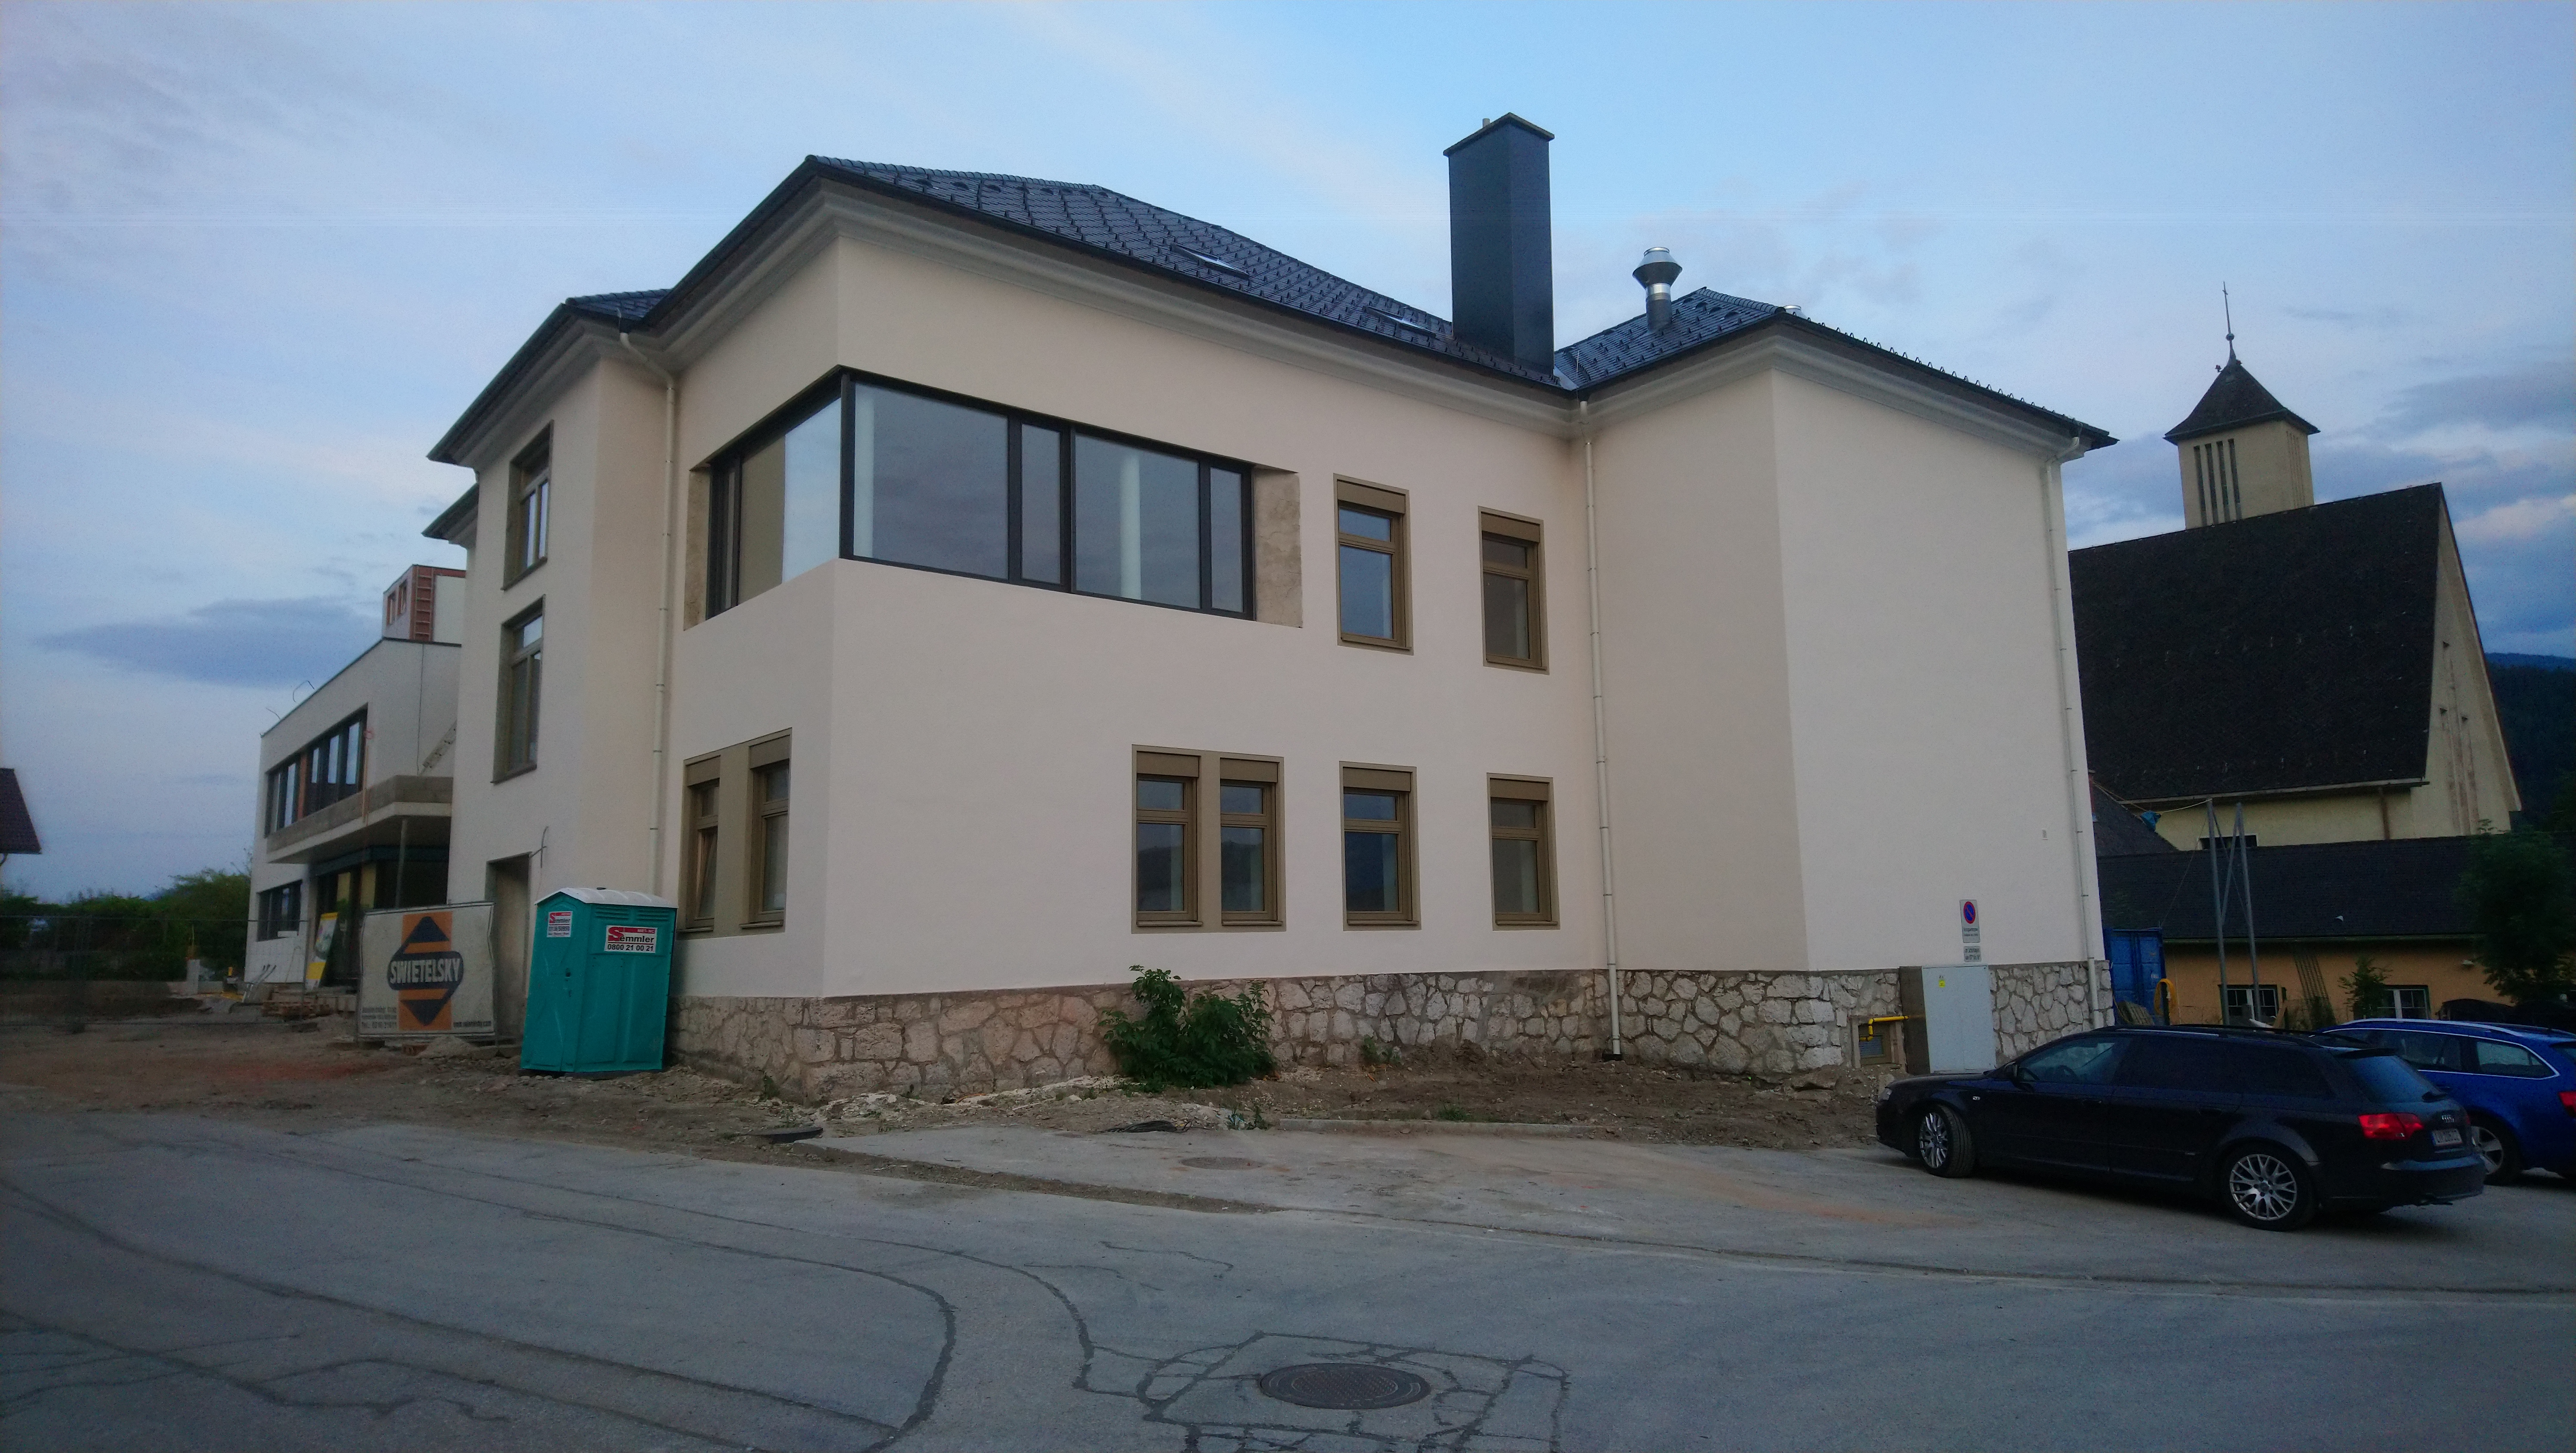 Volksschule Stainach-Pürgg - Building construction